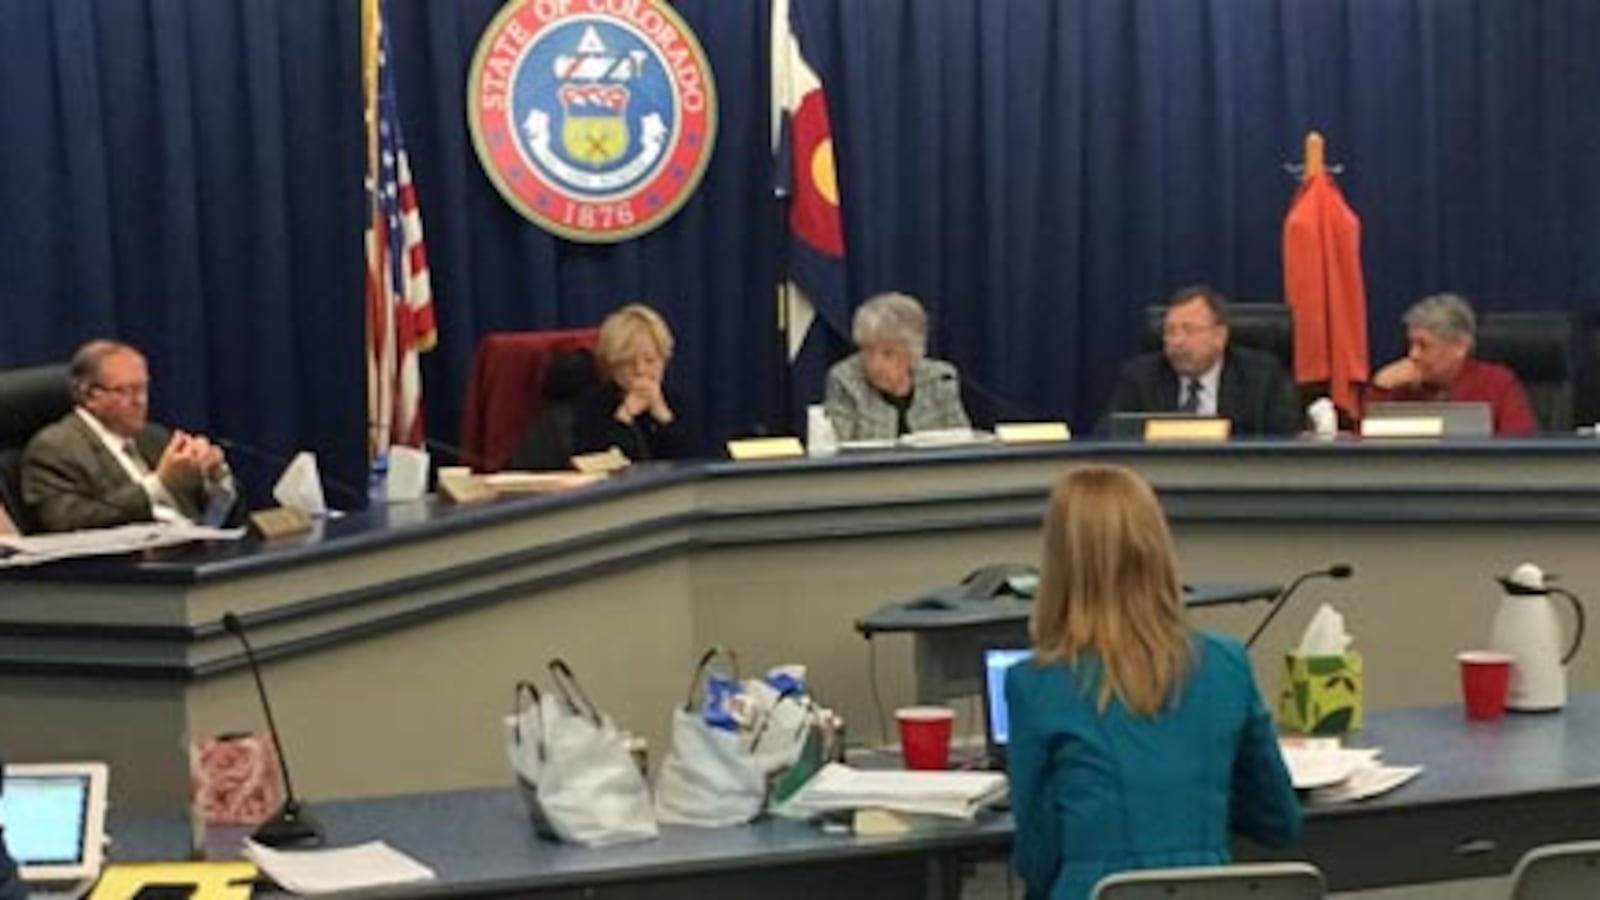 State Board of Education meeting on Feb. 19. 2015.